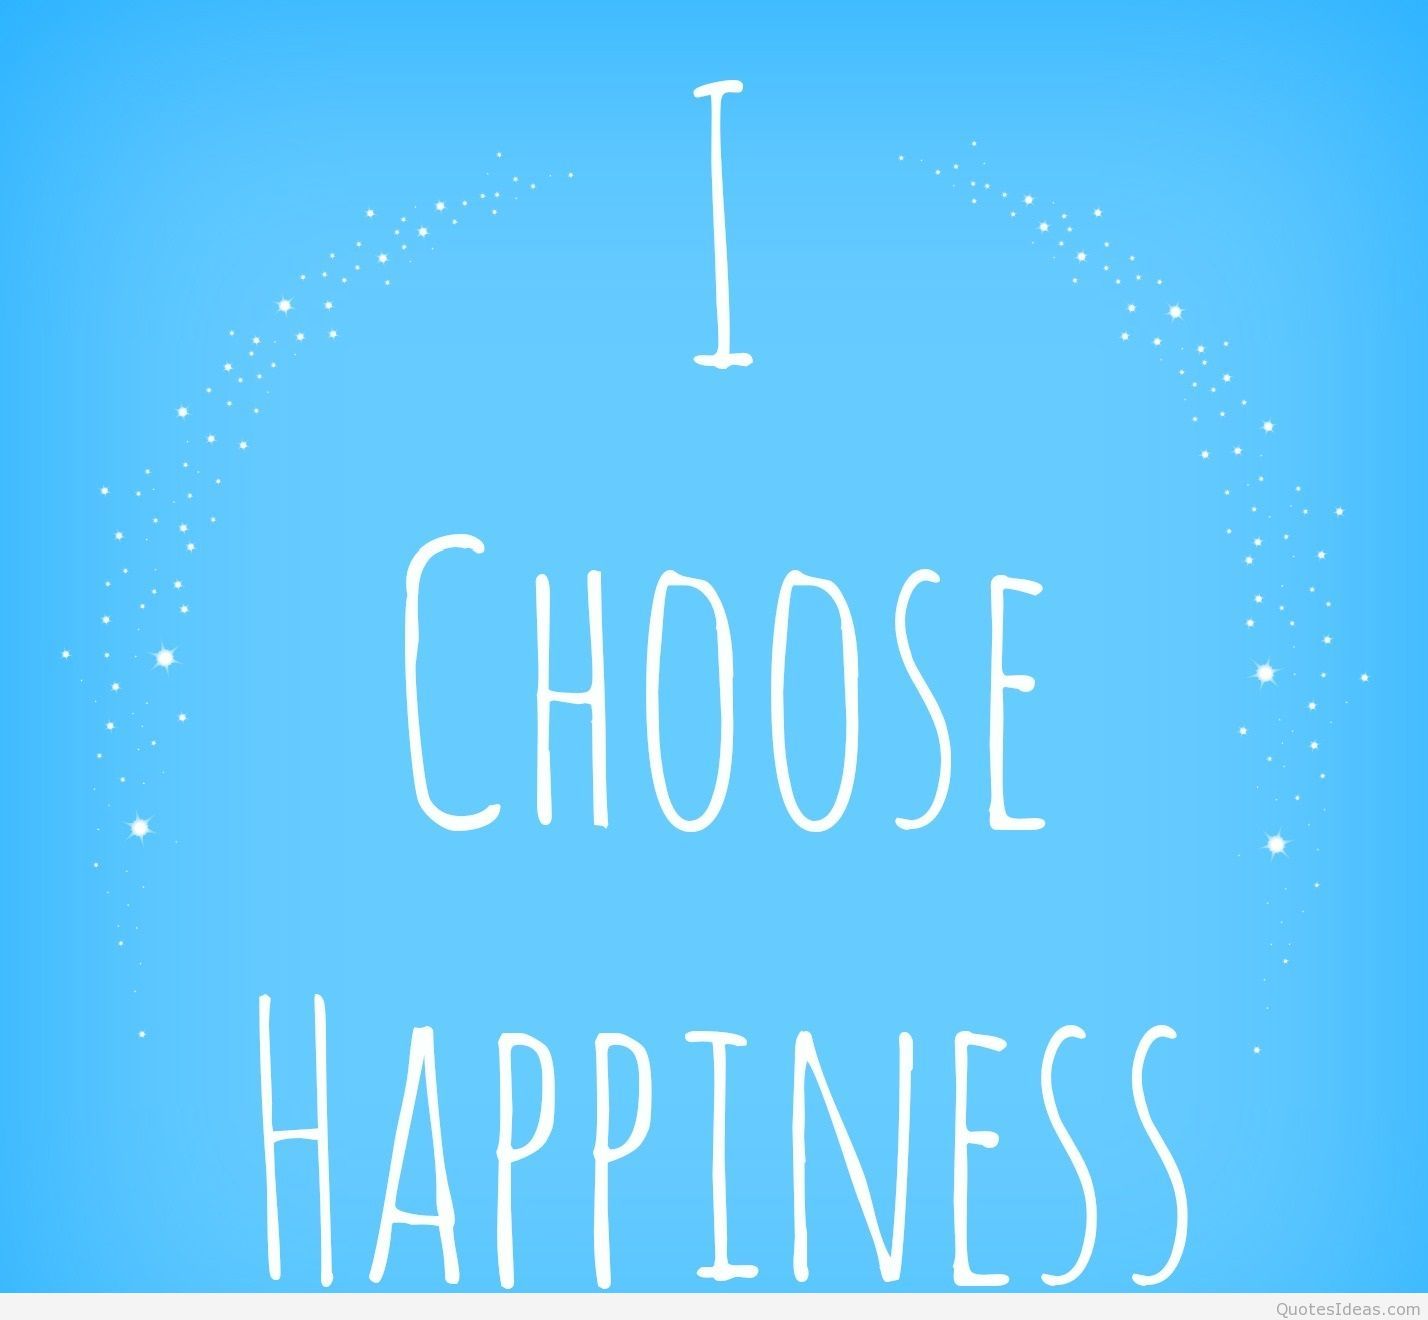 Free download Happiness quotes background and image 2015 2016